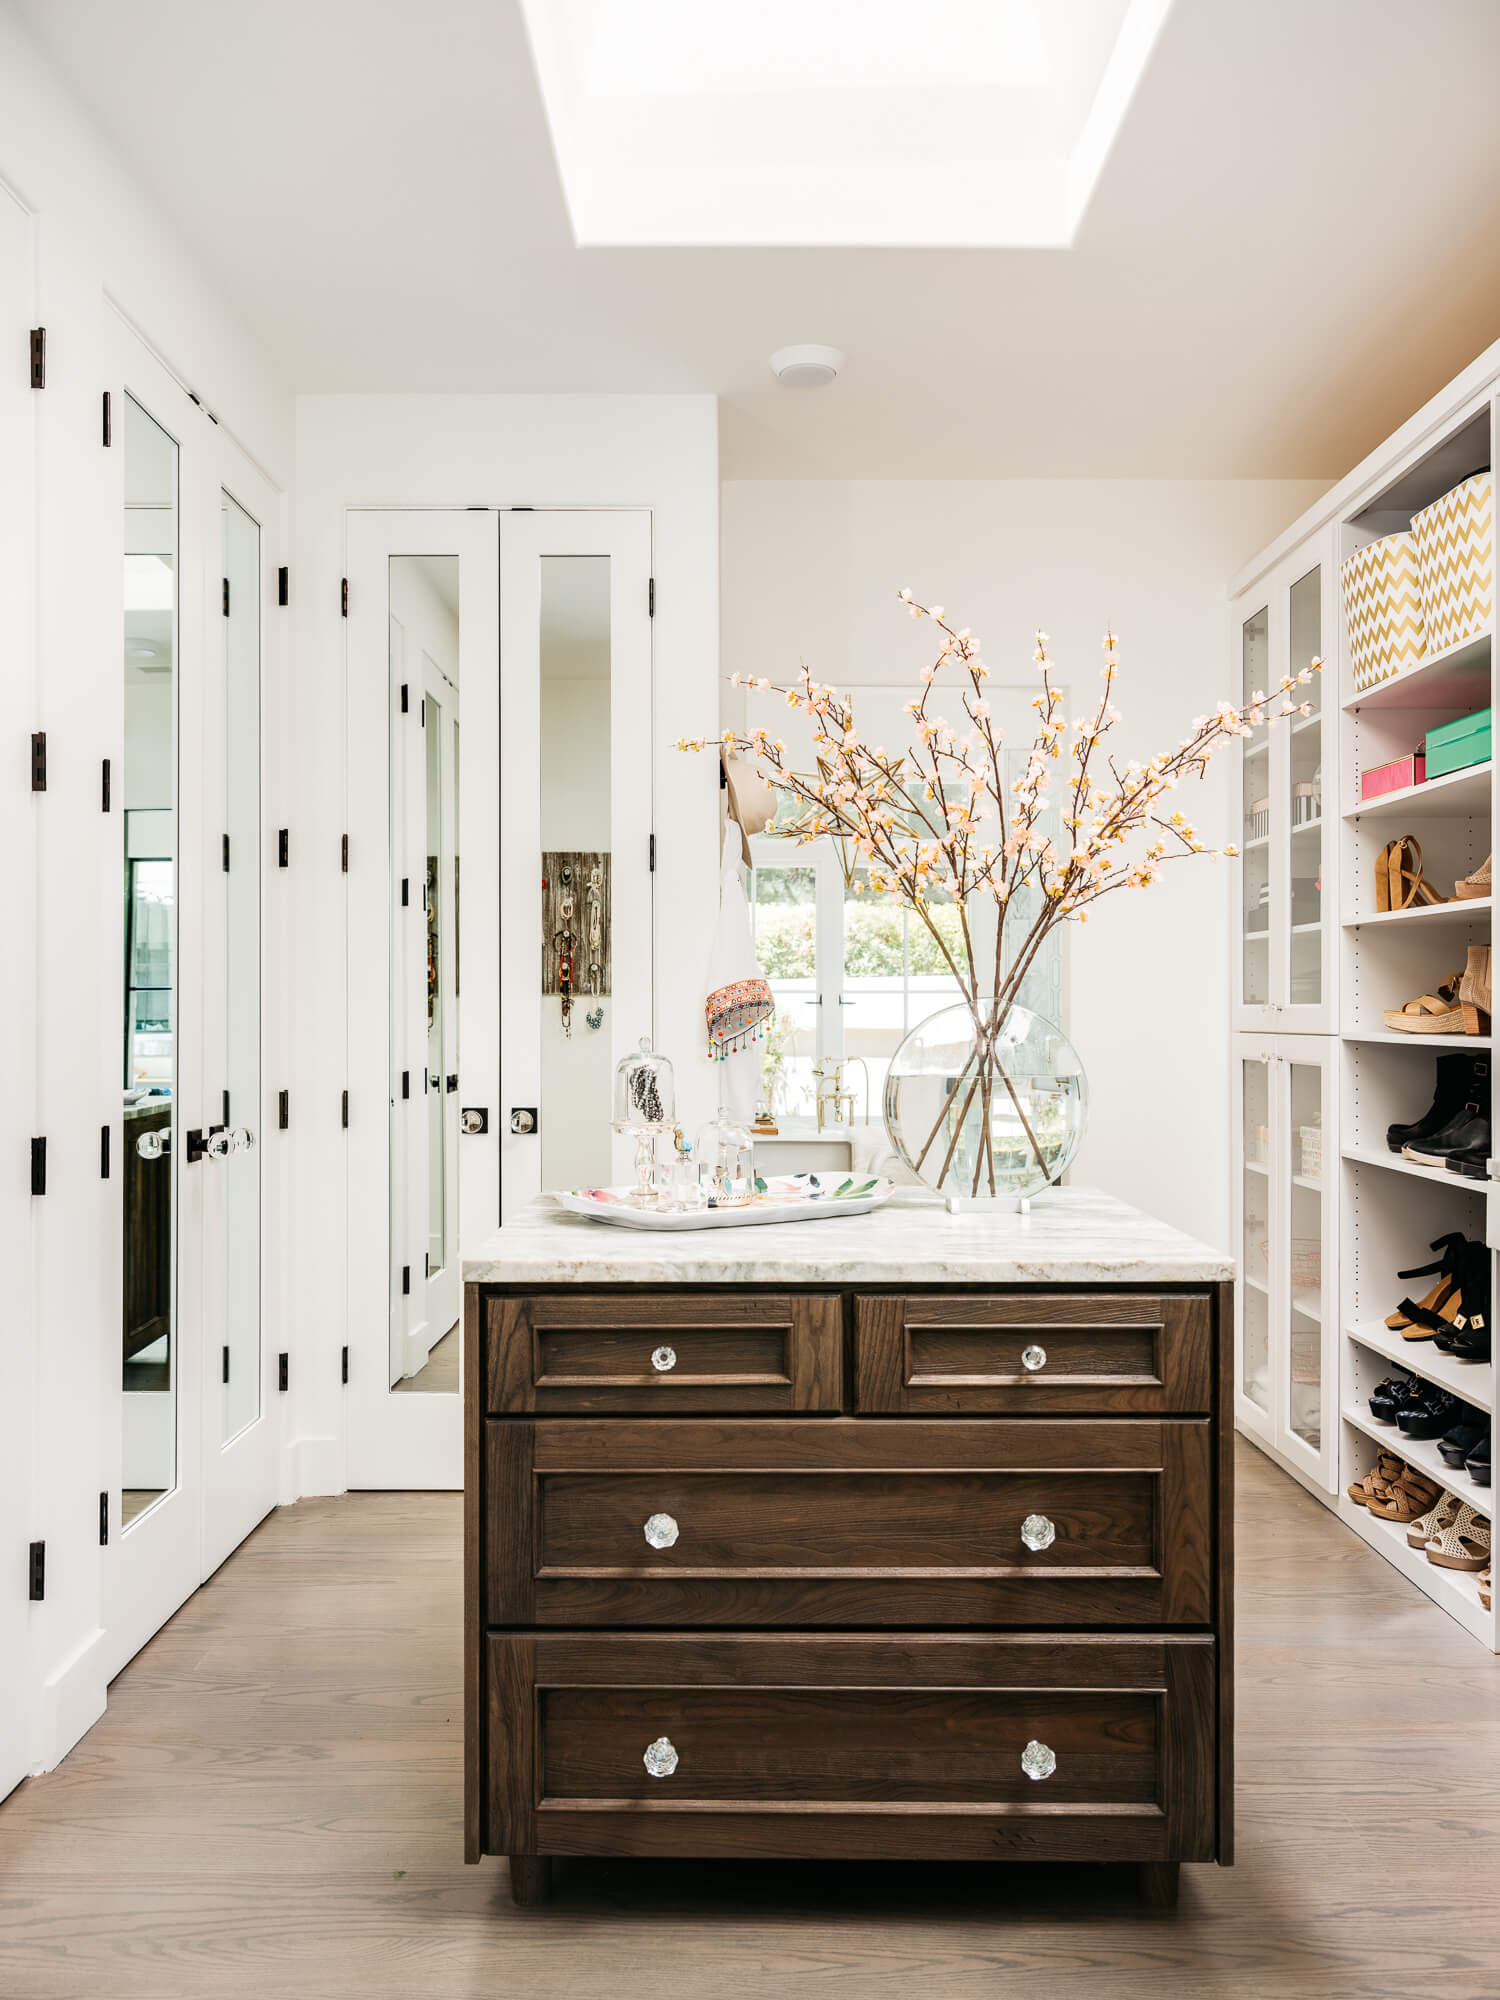 A fabulous walk-in closet with a master bedroom closet island for clothing storage and a work surface for preparing outfits and folding clothes to put away.